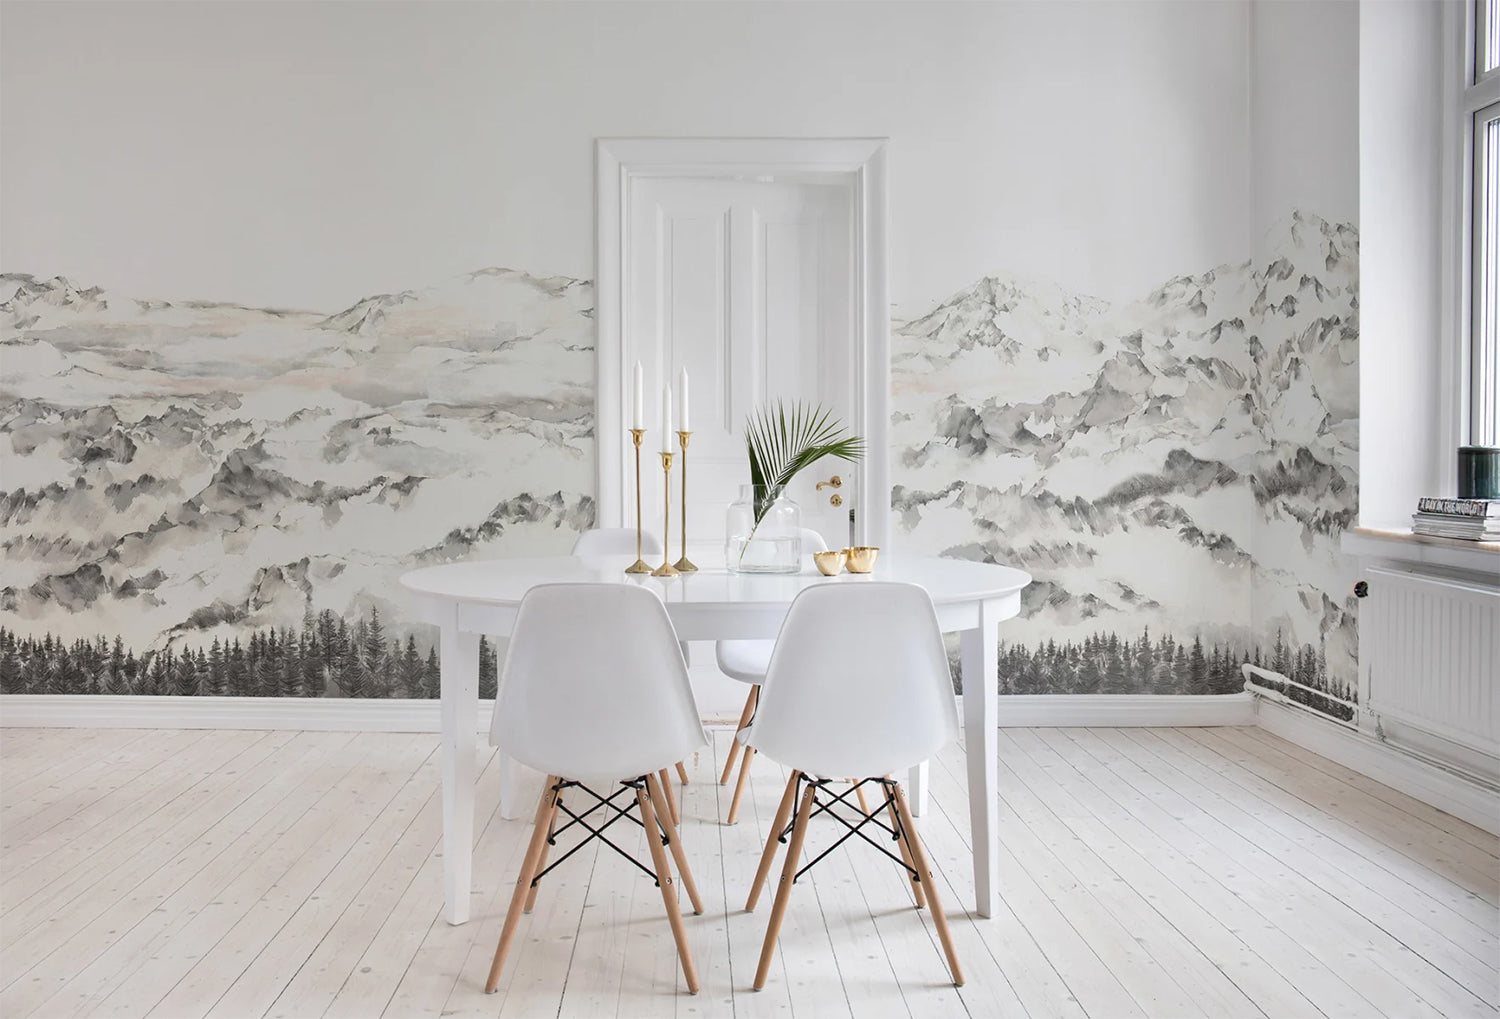 Carol Mountain, Landscape Mural Wallpaper featured on the wall of a dining area with round white table and chair along with a white wood flooring